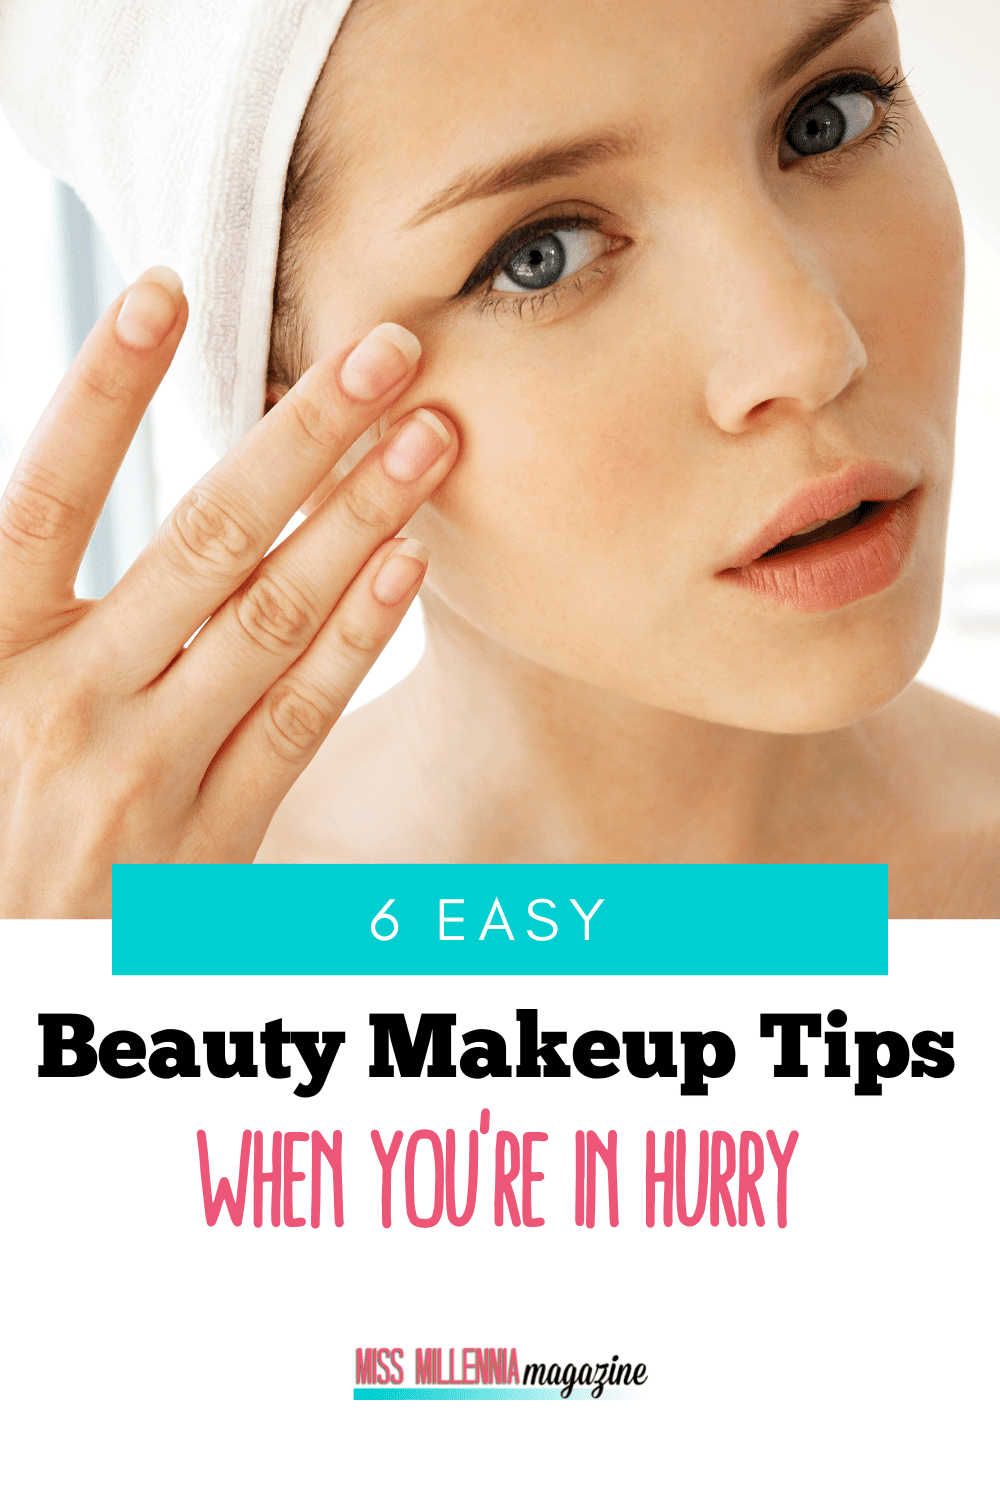 6 Easy Beauty Makeup Tips When You’re in Hurry